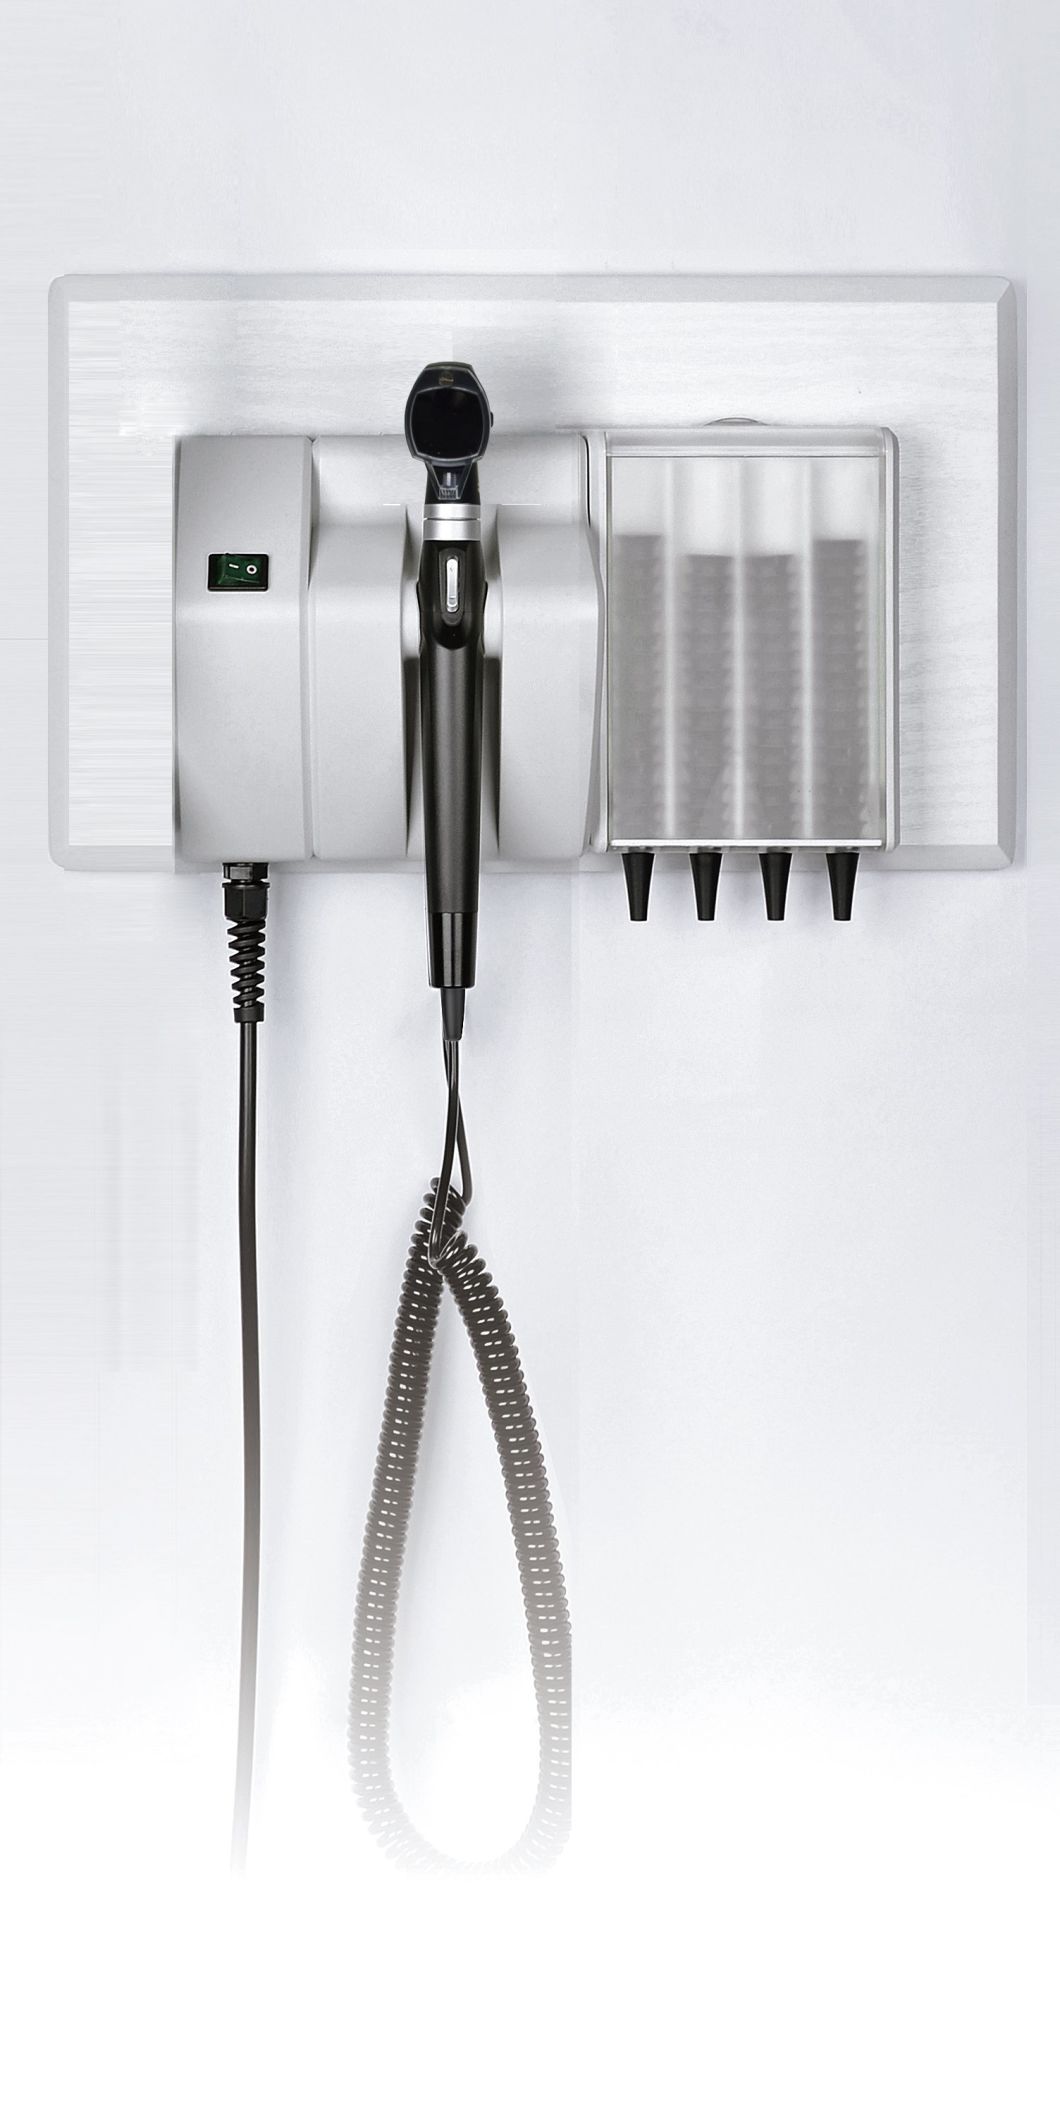 Ent Otoscope & Ophthalmoscope of Integrated Wall System From China Msloo2